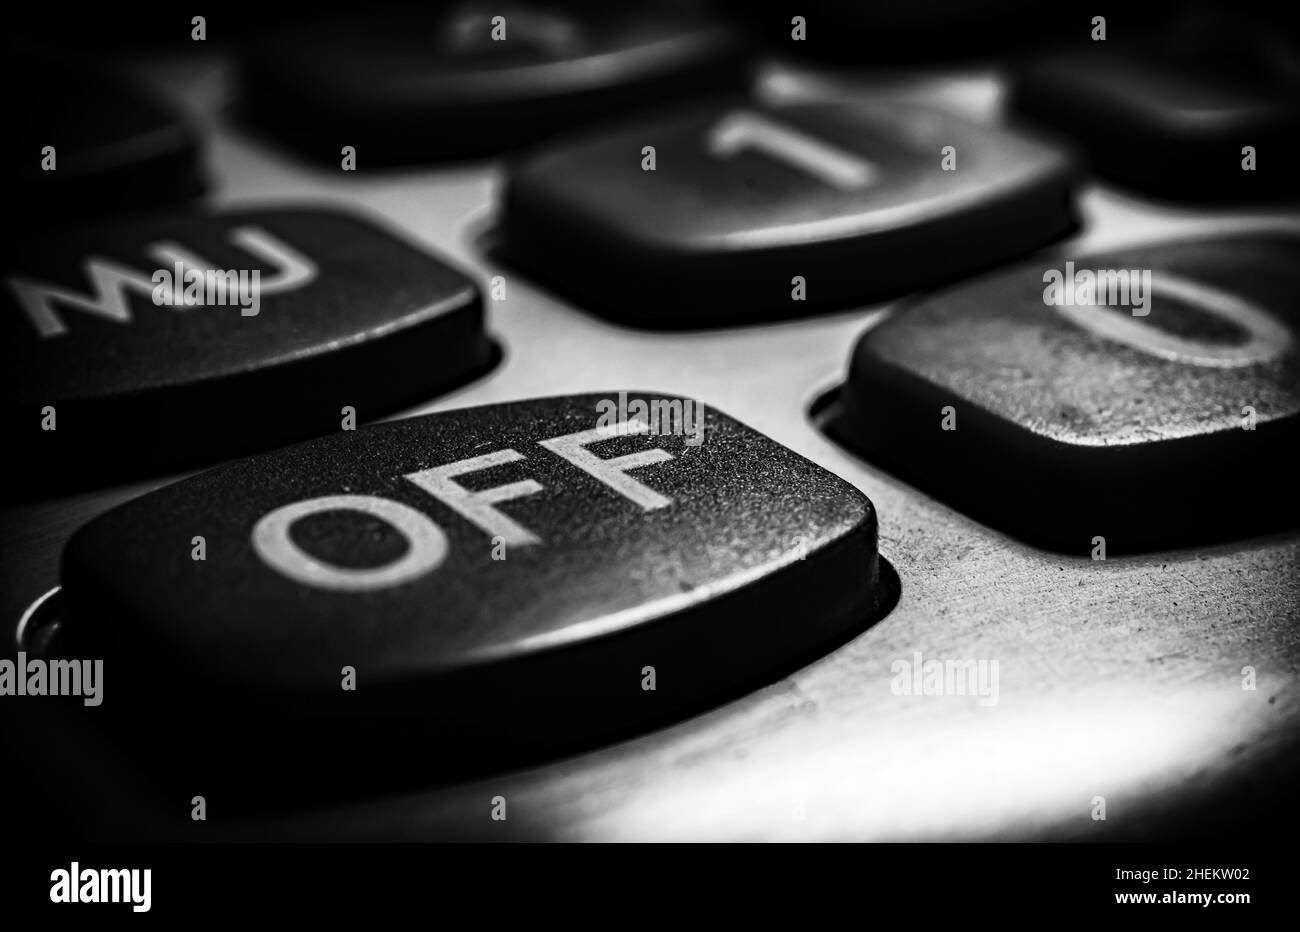 A harsh black and white treatment with vignette, calculator close up.Getting OFF at the corner. Stock Photo